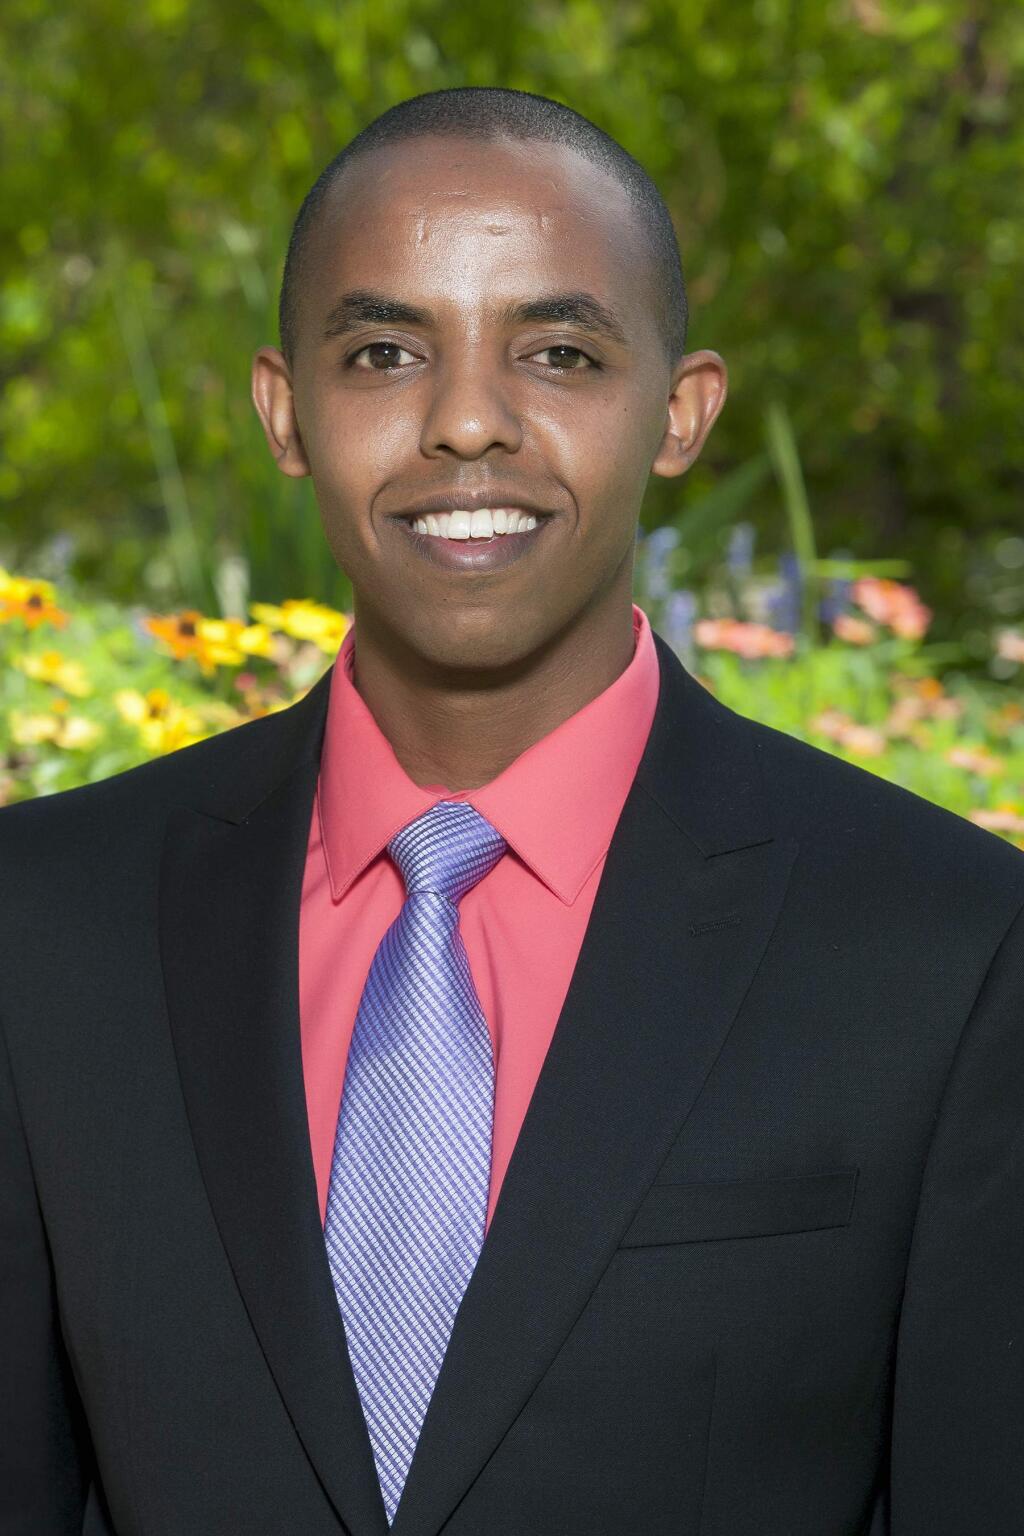 Dawit Tesfasilassie, 33, assistant administrator, Sutter Santa Rosa Regional Hospital, is a North Bay Business Journal 2019 Forty Under 40 winner. (BILL MAHON PHOTO)